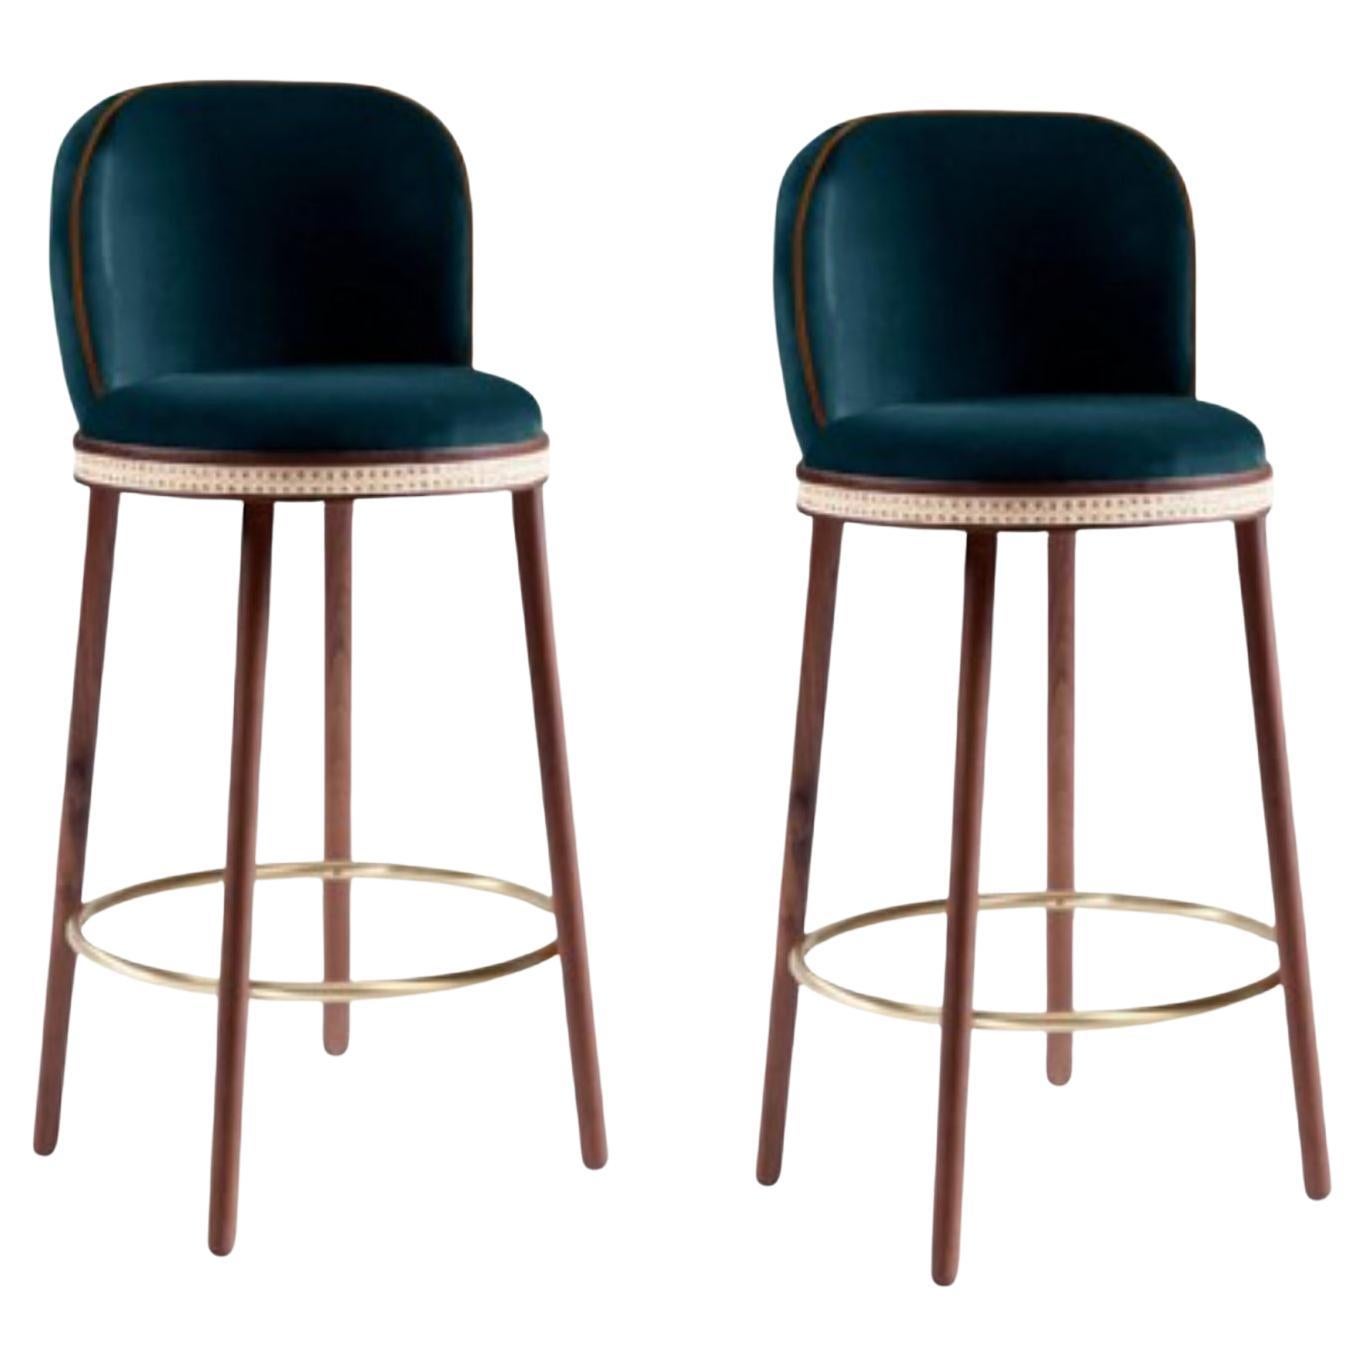 Set of 2 Alma Bar Chairs by Dooq